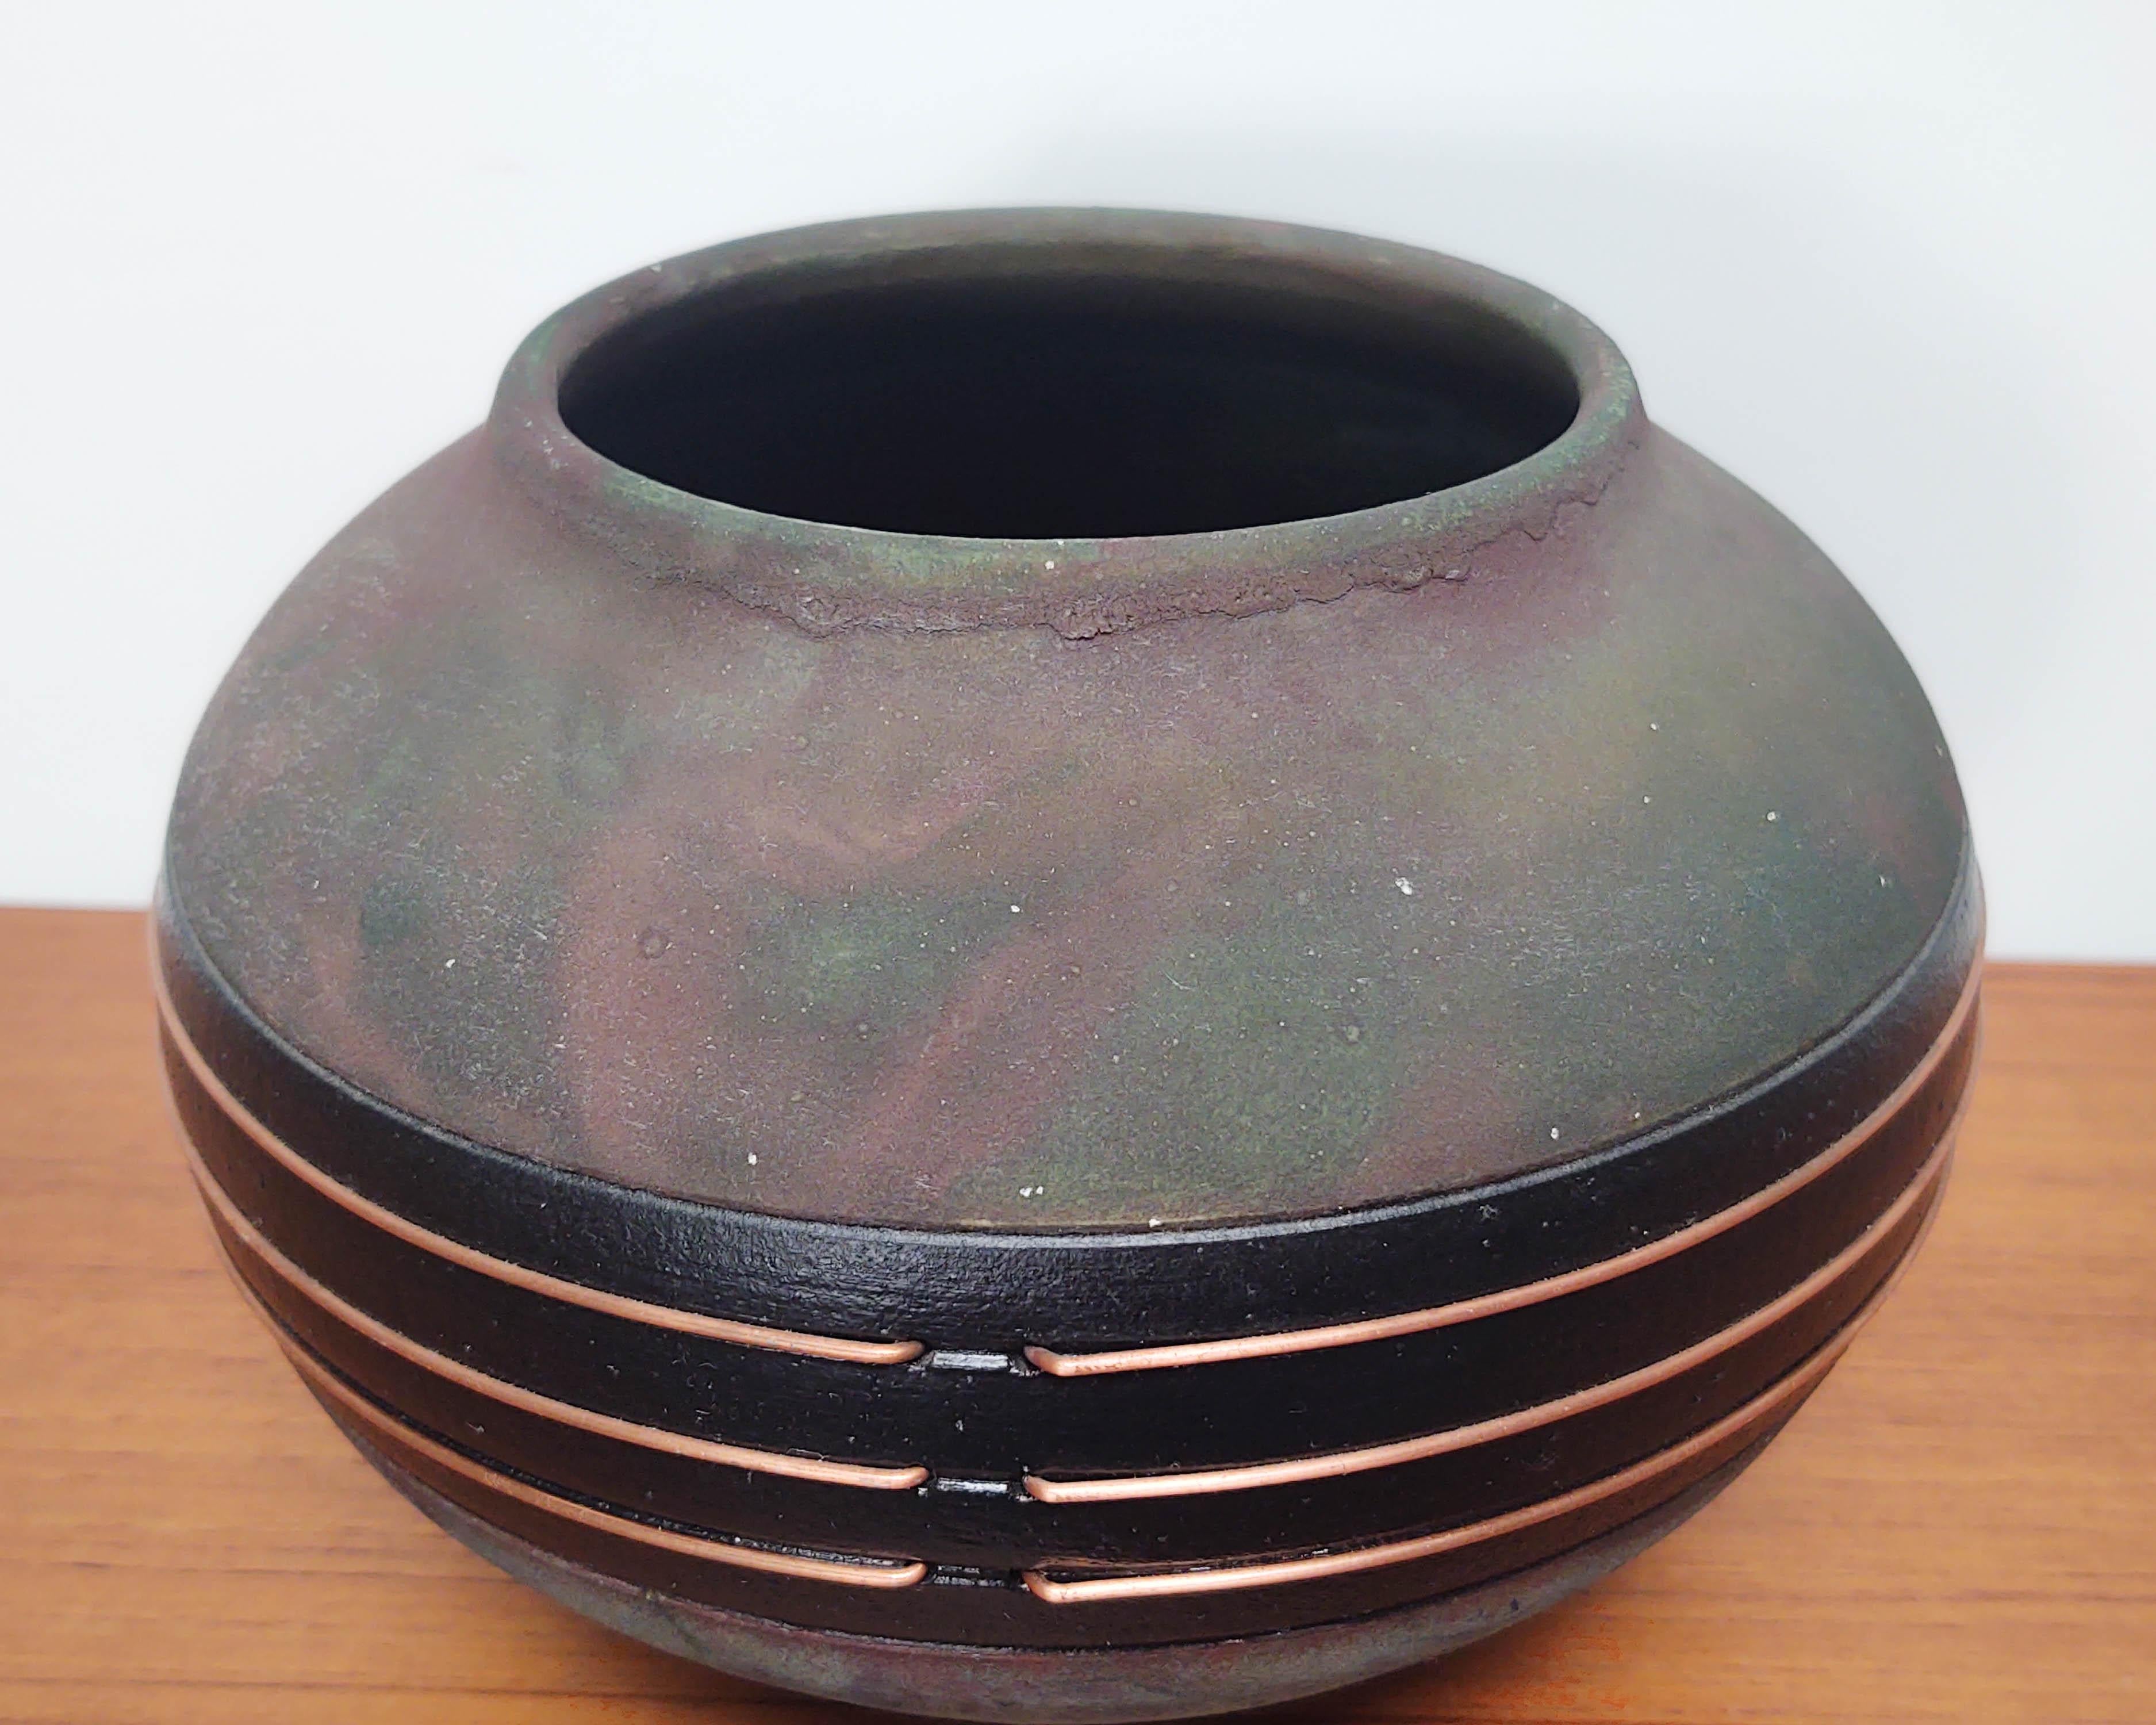 Oblong black ceramic vase / vessel with swirling rainbow oxide coating typical of raku firing. Copper wire decorations are integral to the vessel. Not watertight, typical of earthenware. Signed on bottom.
 
6